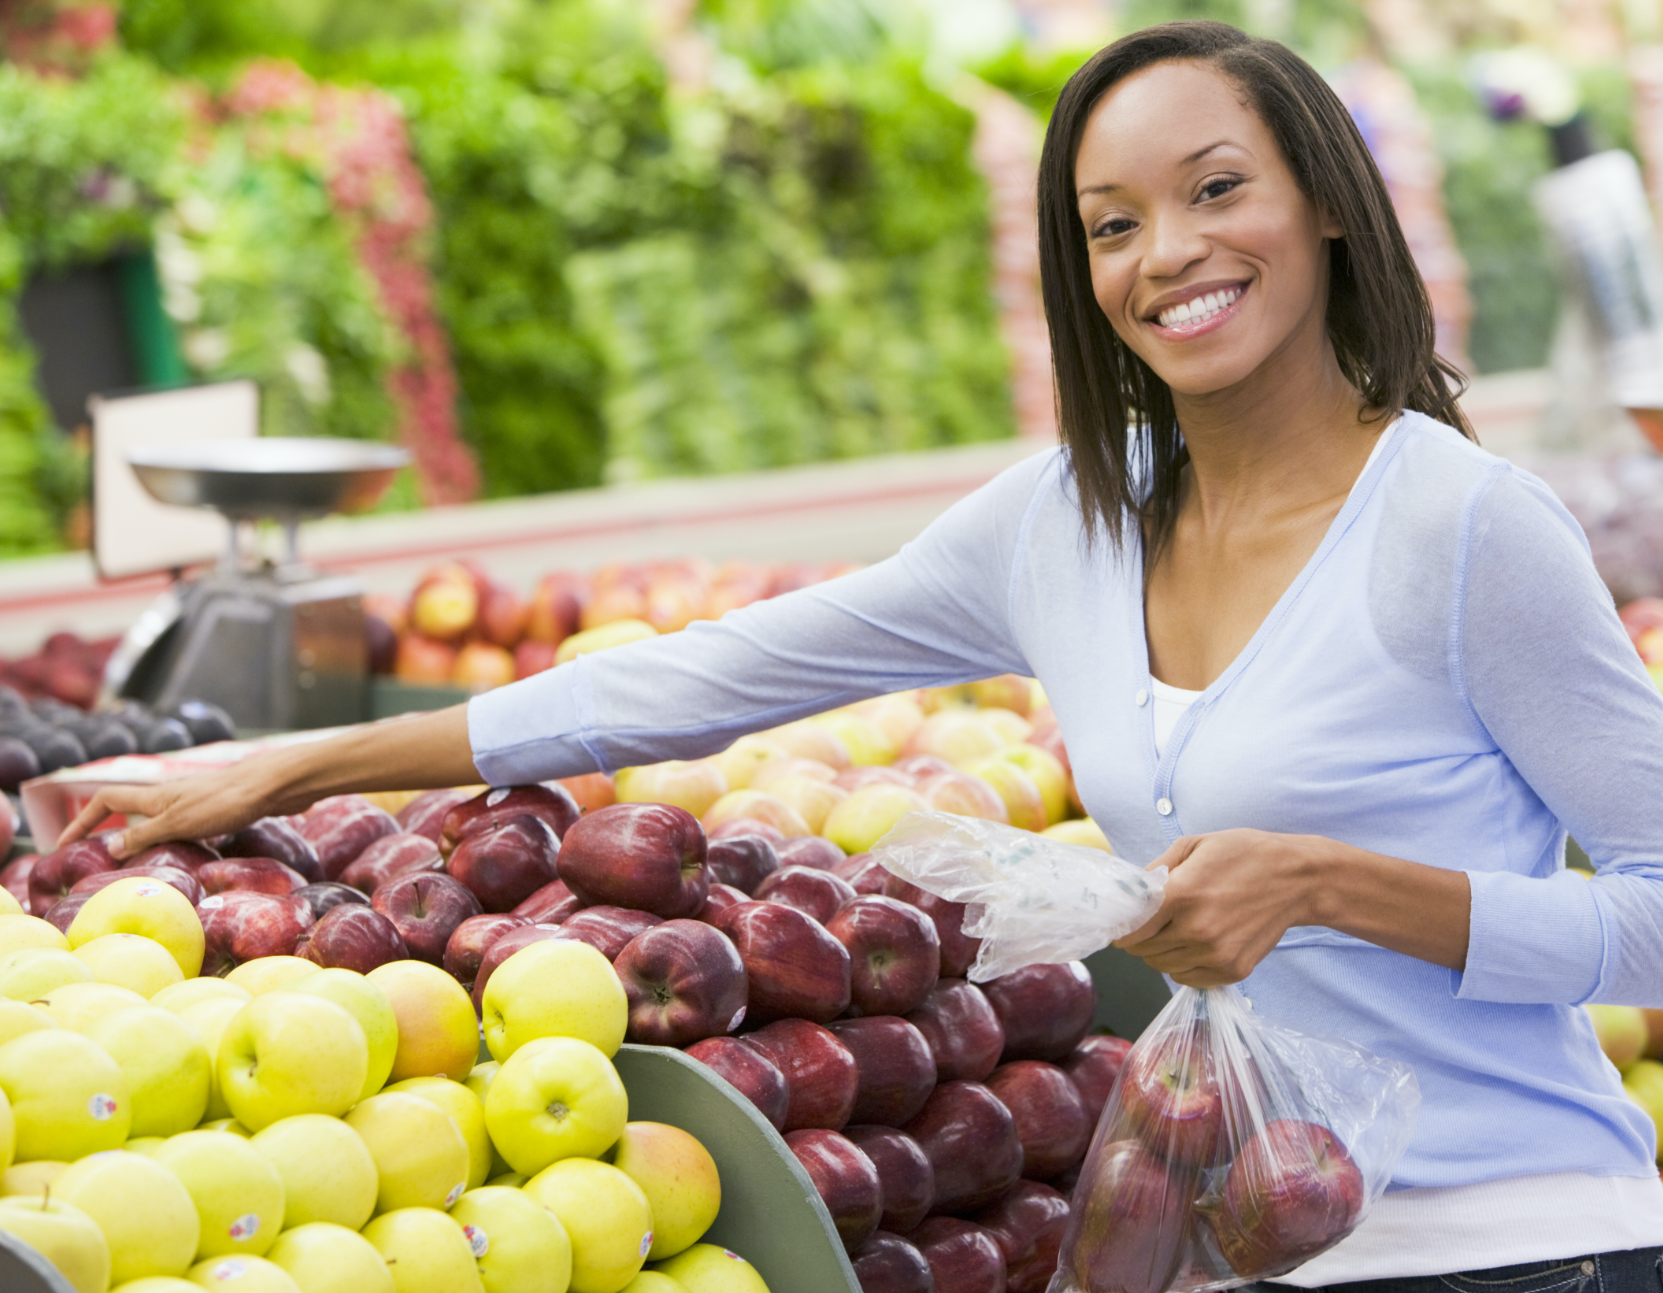 Heart-Healthy Foods: Shopping list 